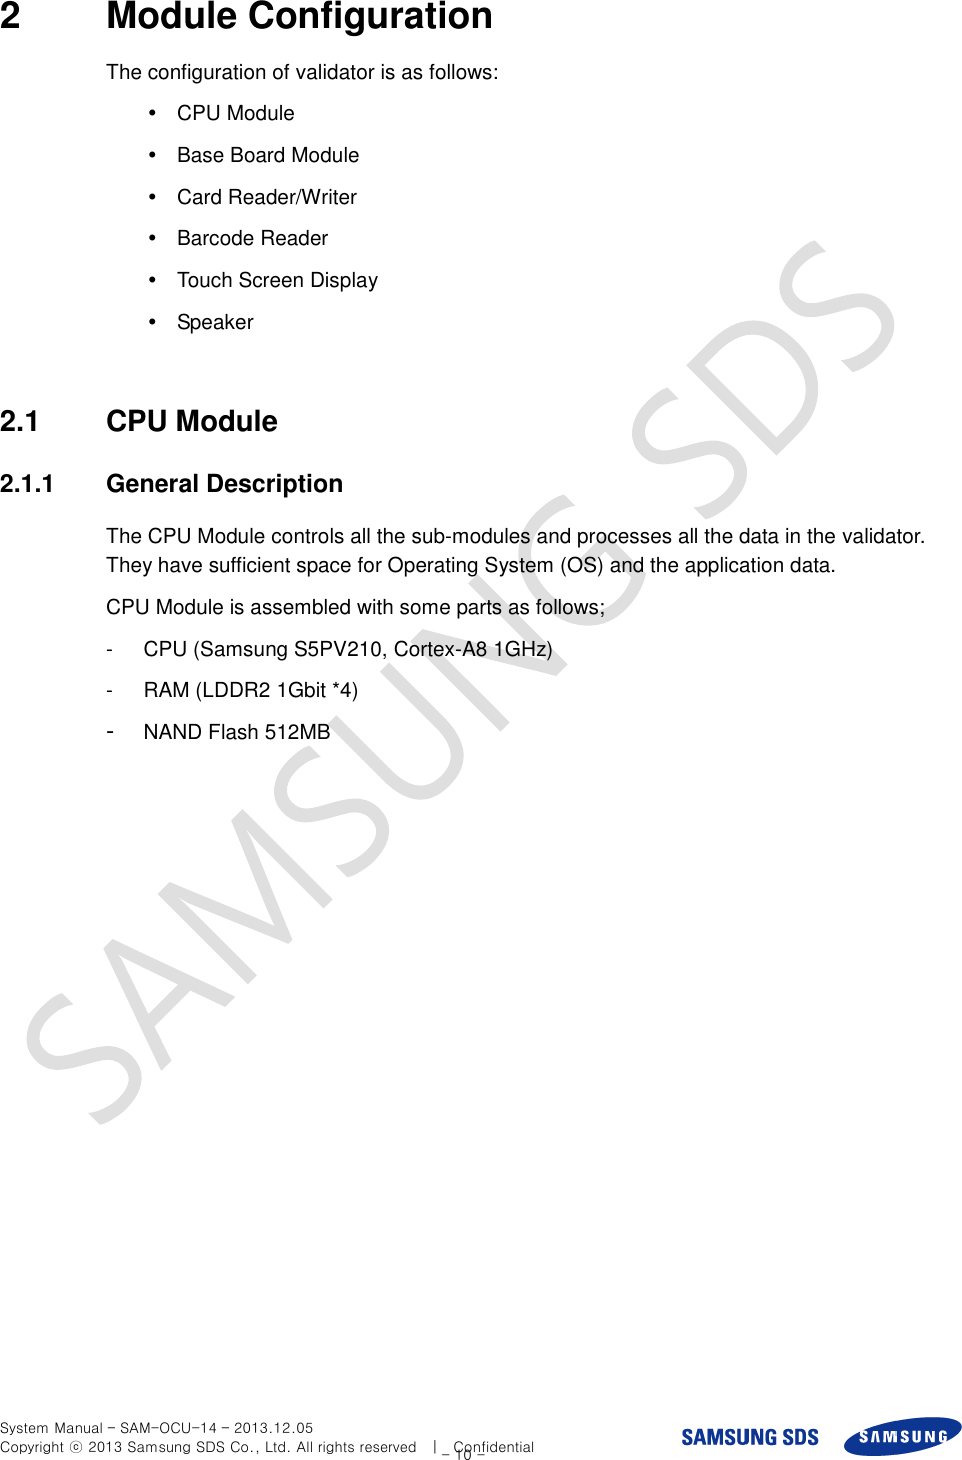  System Manual – SAM-OCU-14 – 2013.12.05 Copyright ⓒ 2013 Samsung SDS Co., Ltd. All rights reserved    |    Confidential - 10 - 2  Module Configuration The configuration of validator is as follows:     CPU Module   Base Board Module   Card Reader/Writer   Barcode Reader   Touch Screen Display   Speaker  2.1  CPU Module 2.1.1  General Description The CPU Module controls all the sub-modules and processes all the data in the validator. They have sufficient space for Operating System (OS) and the application data.   CPU Module is assembled with some parts as follows; -  CPU (Samsung S5PV210, Cortex-A8 1GHz) -  RAM (LDDR2 1Gbit *4) -  NAND Flash 512MB 